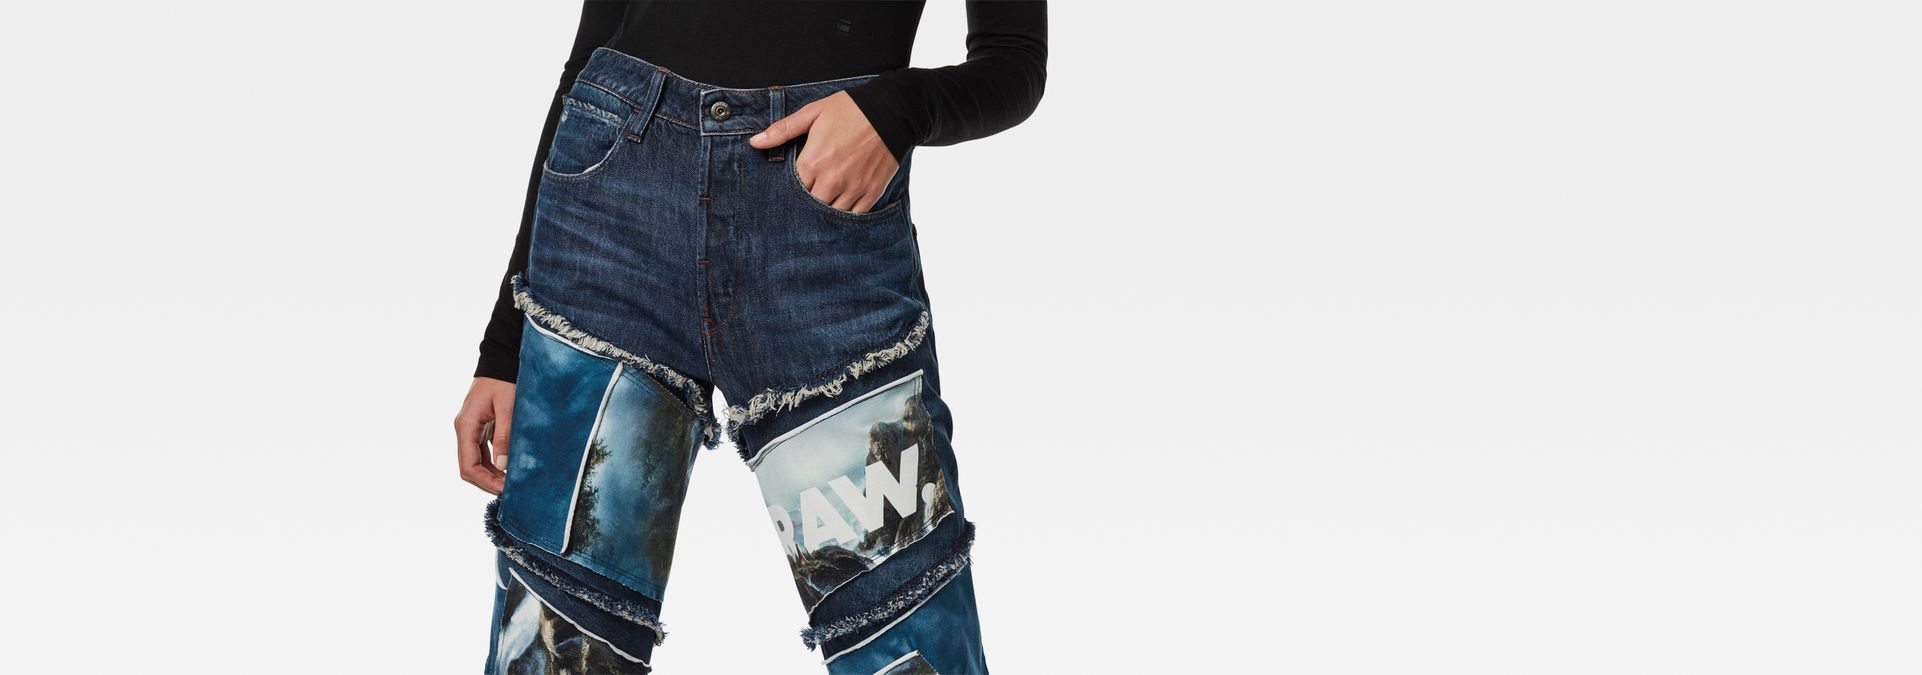 g star raw patch jeans